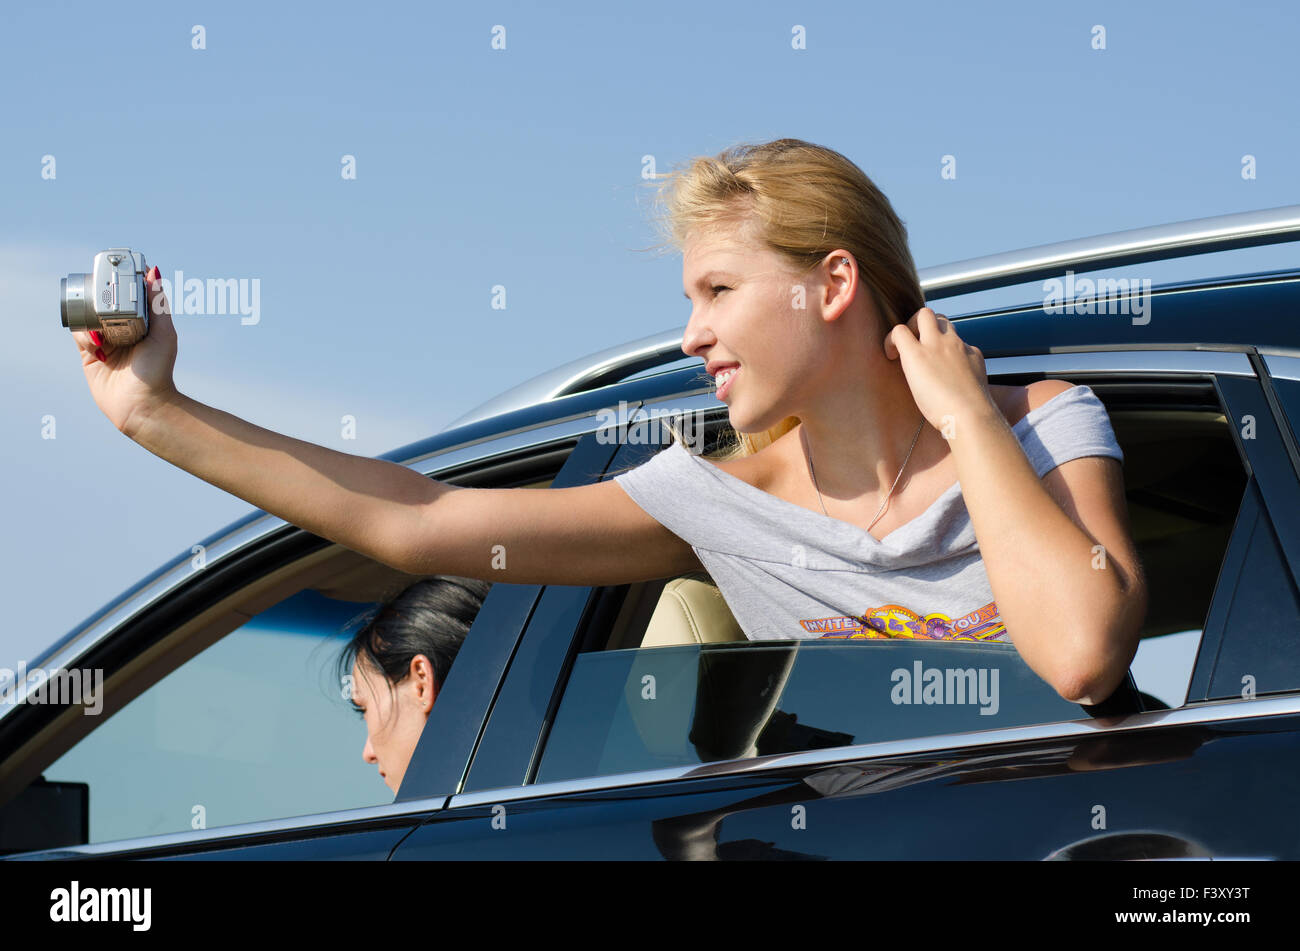 Young woman taking photos from a car Stock Photo